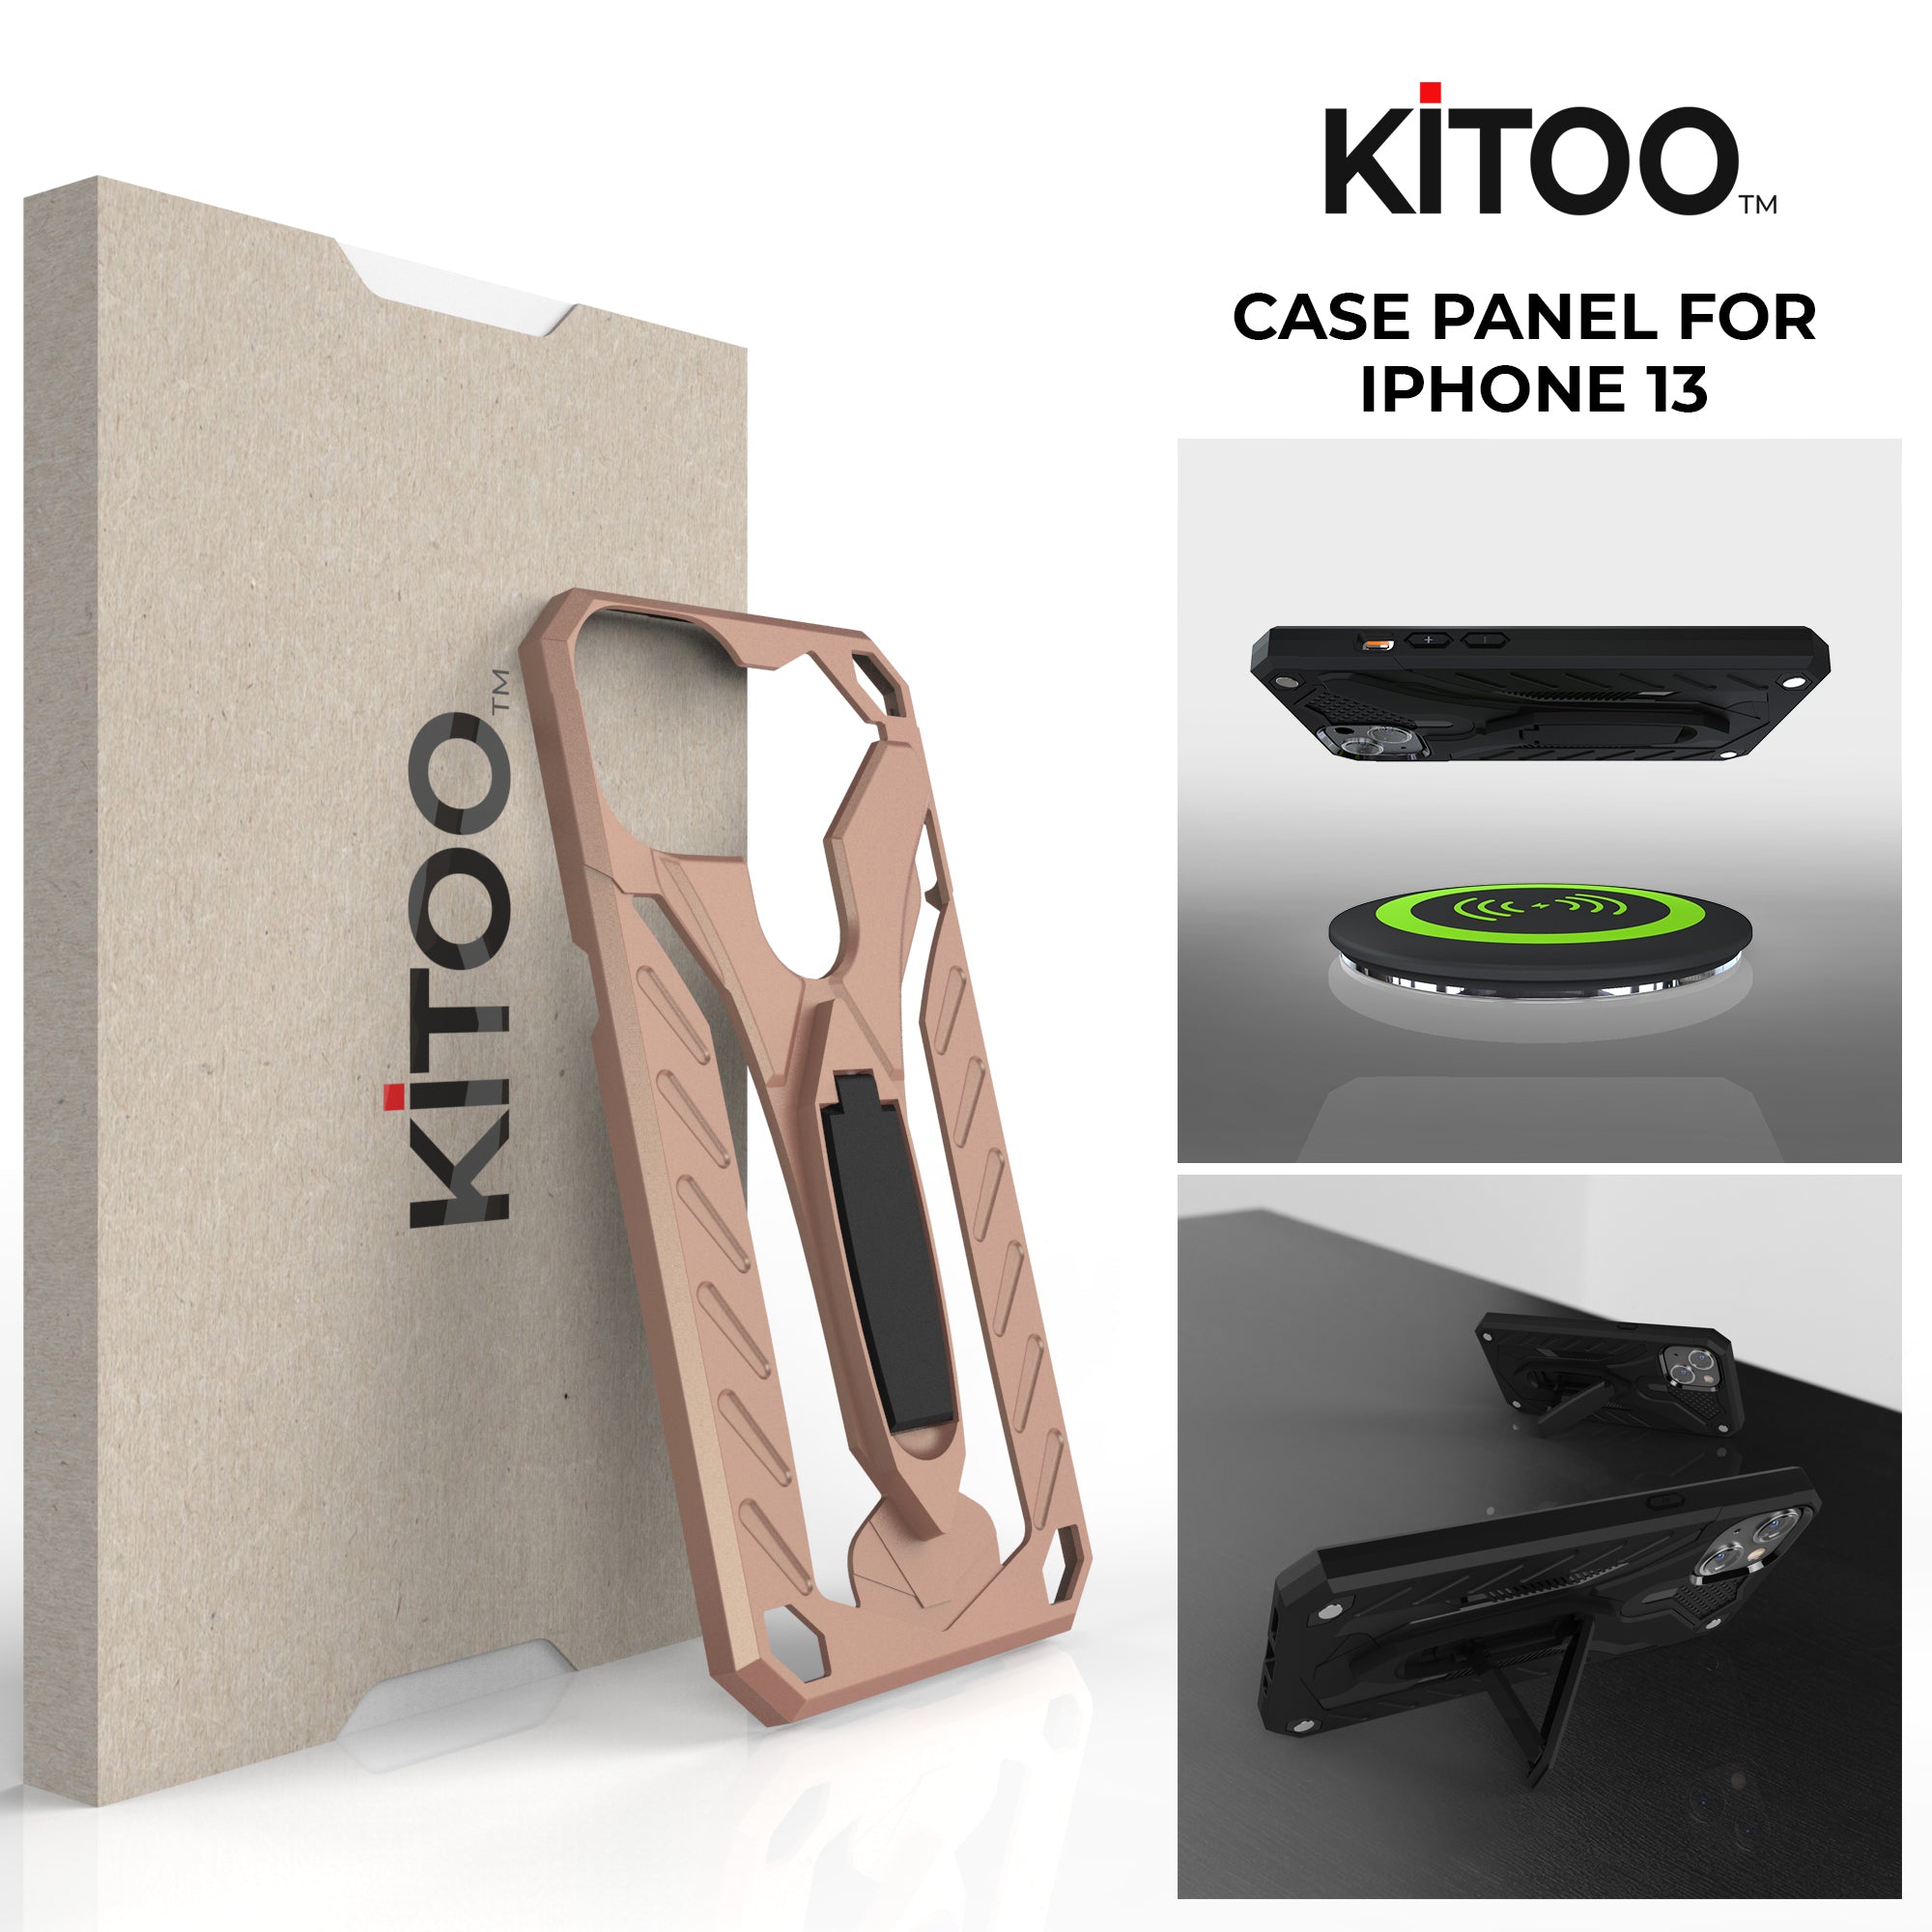 Kitoo Kickstand Panel Designed for iPhone 13 case (Spare Part only) - Rose Golden